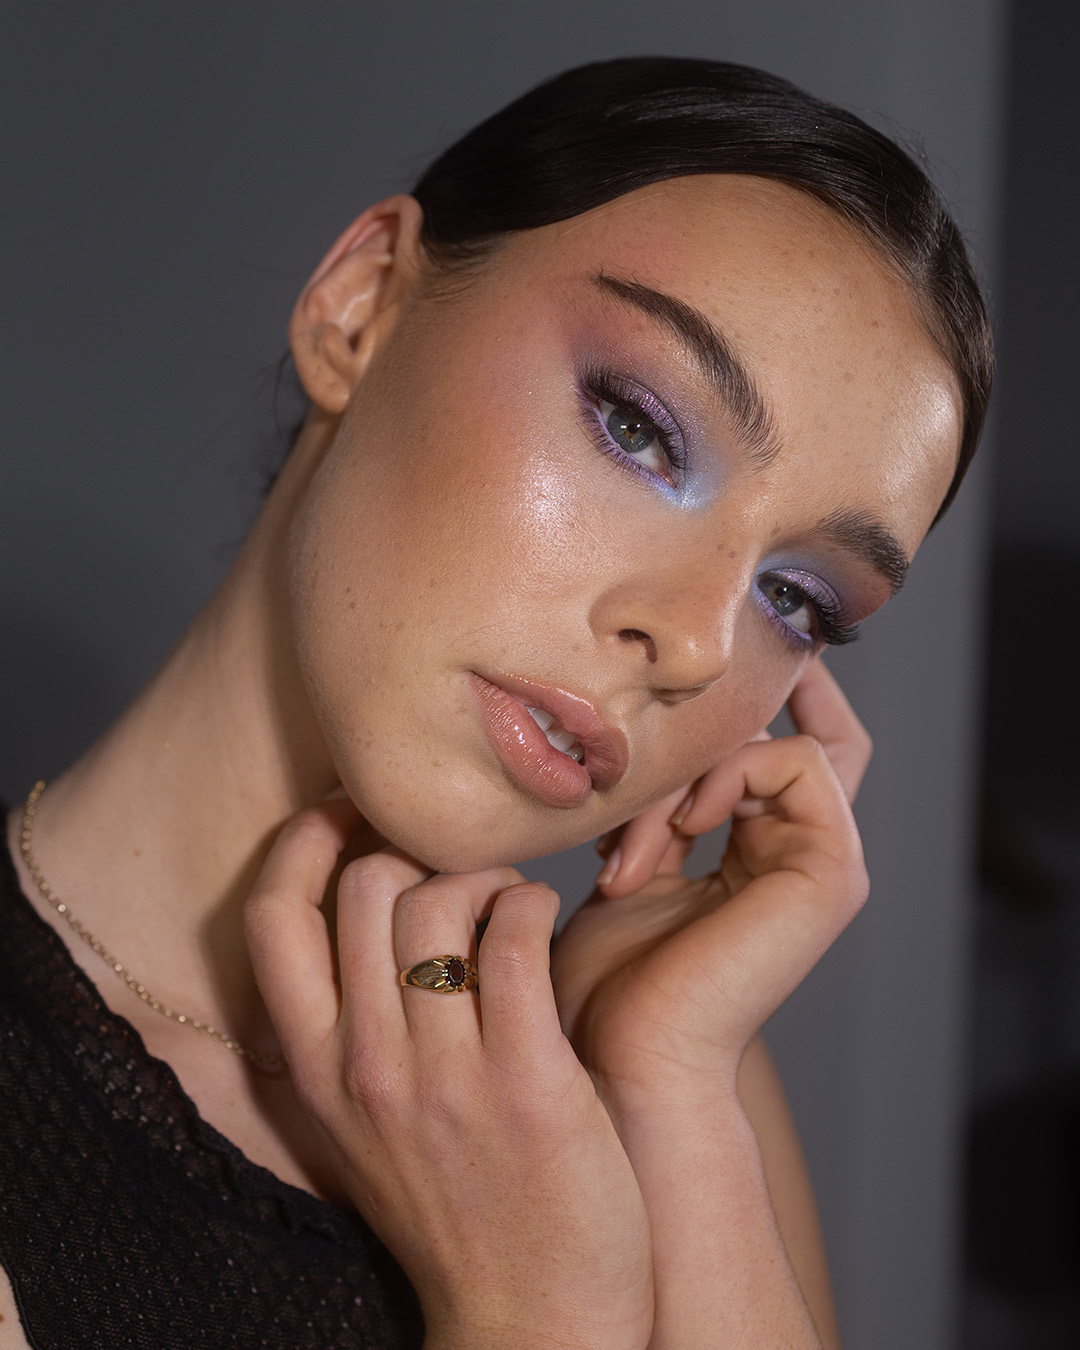 Glowy makeup and glowy skin shown on a model, with makeup done by Jonathon Thorpe.